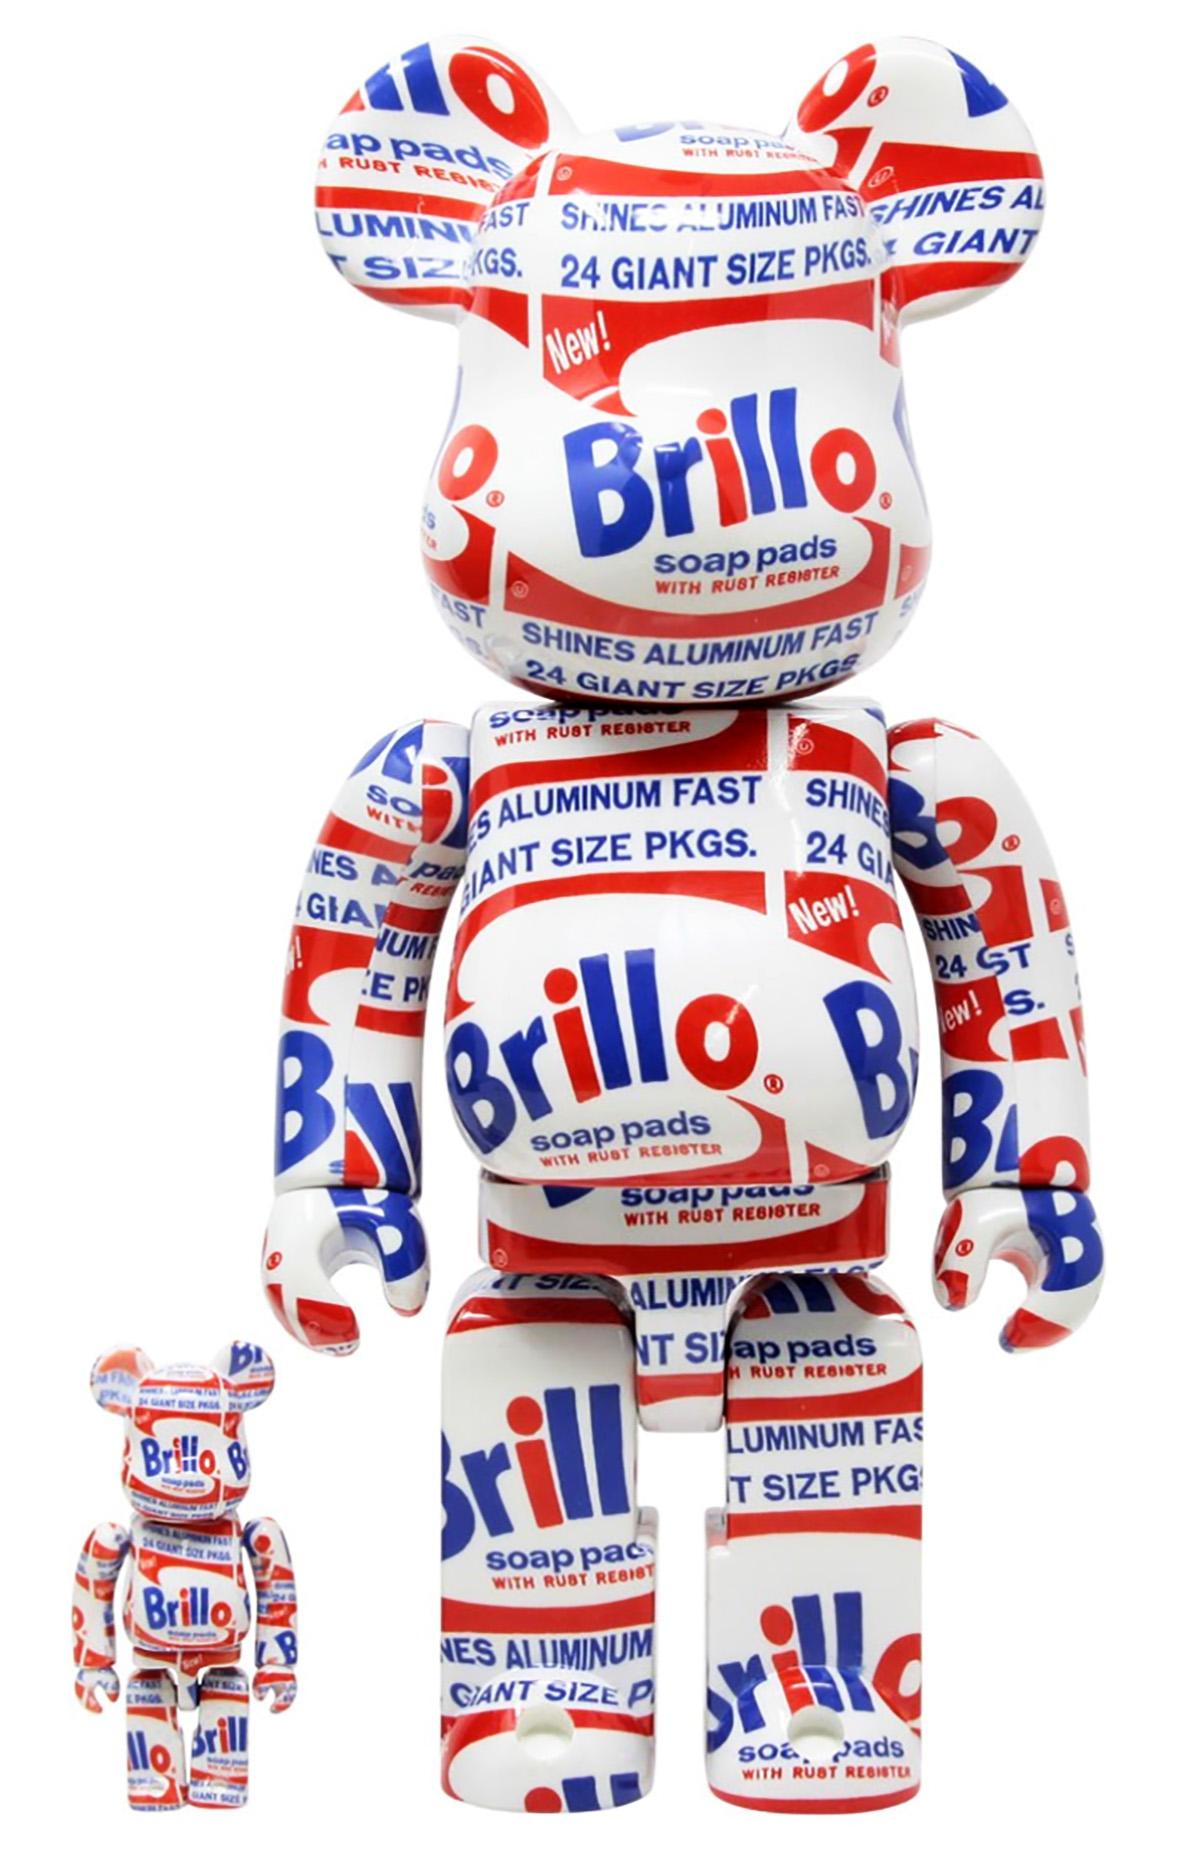 Any Warhol Bearbrick: 
Be@rbrick x Andy Warhol Foundation "Brillo" Vinyl Figures: Set of two (400% & 100%): Andy Warhol (after) Brillo collectible trademarked & licensed by the Estate of Andy Warhol. The partnered collectible reveals Warhol‘s iconic